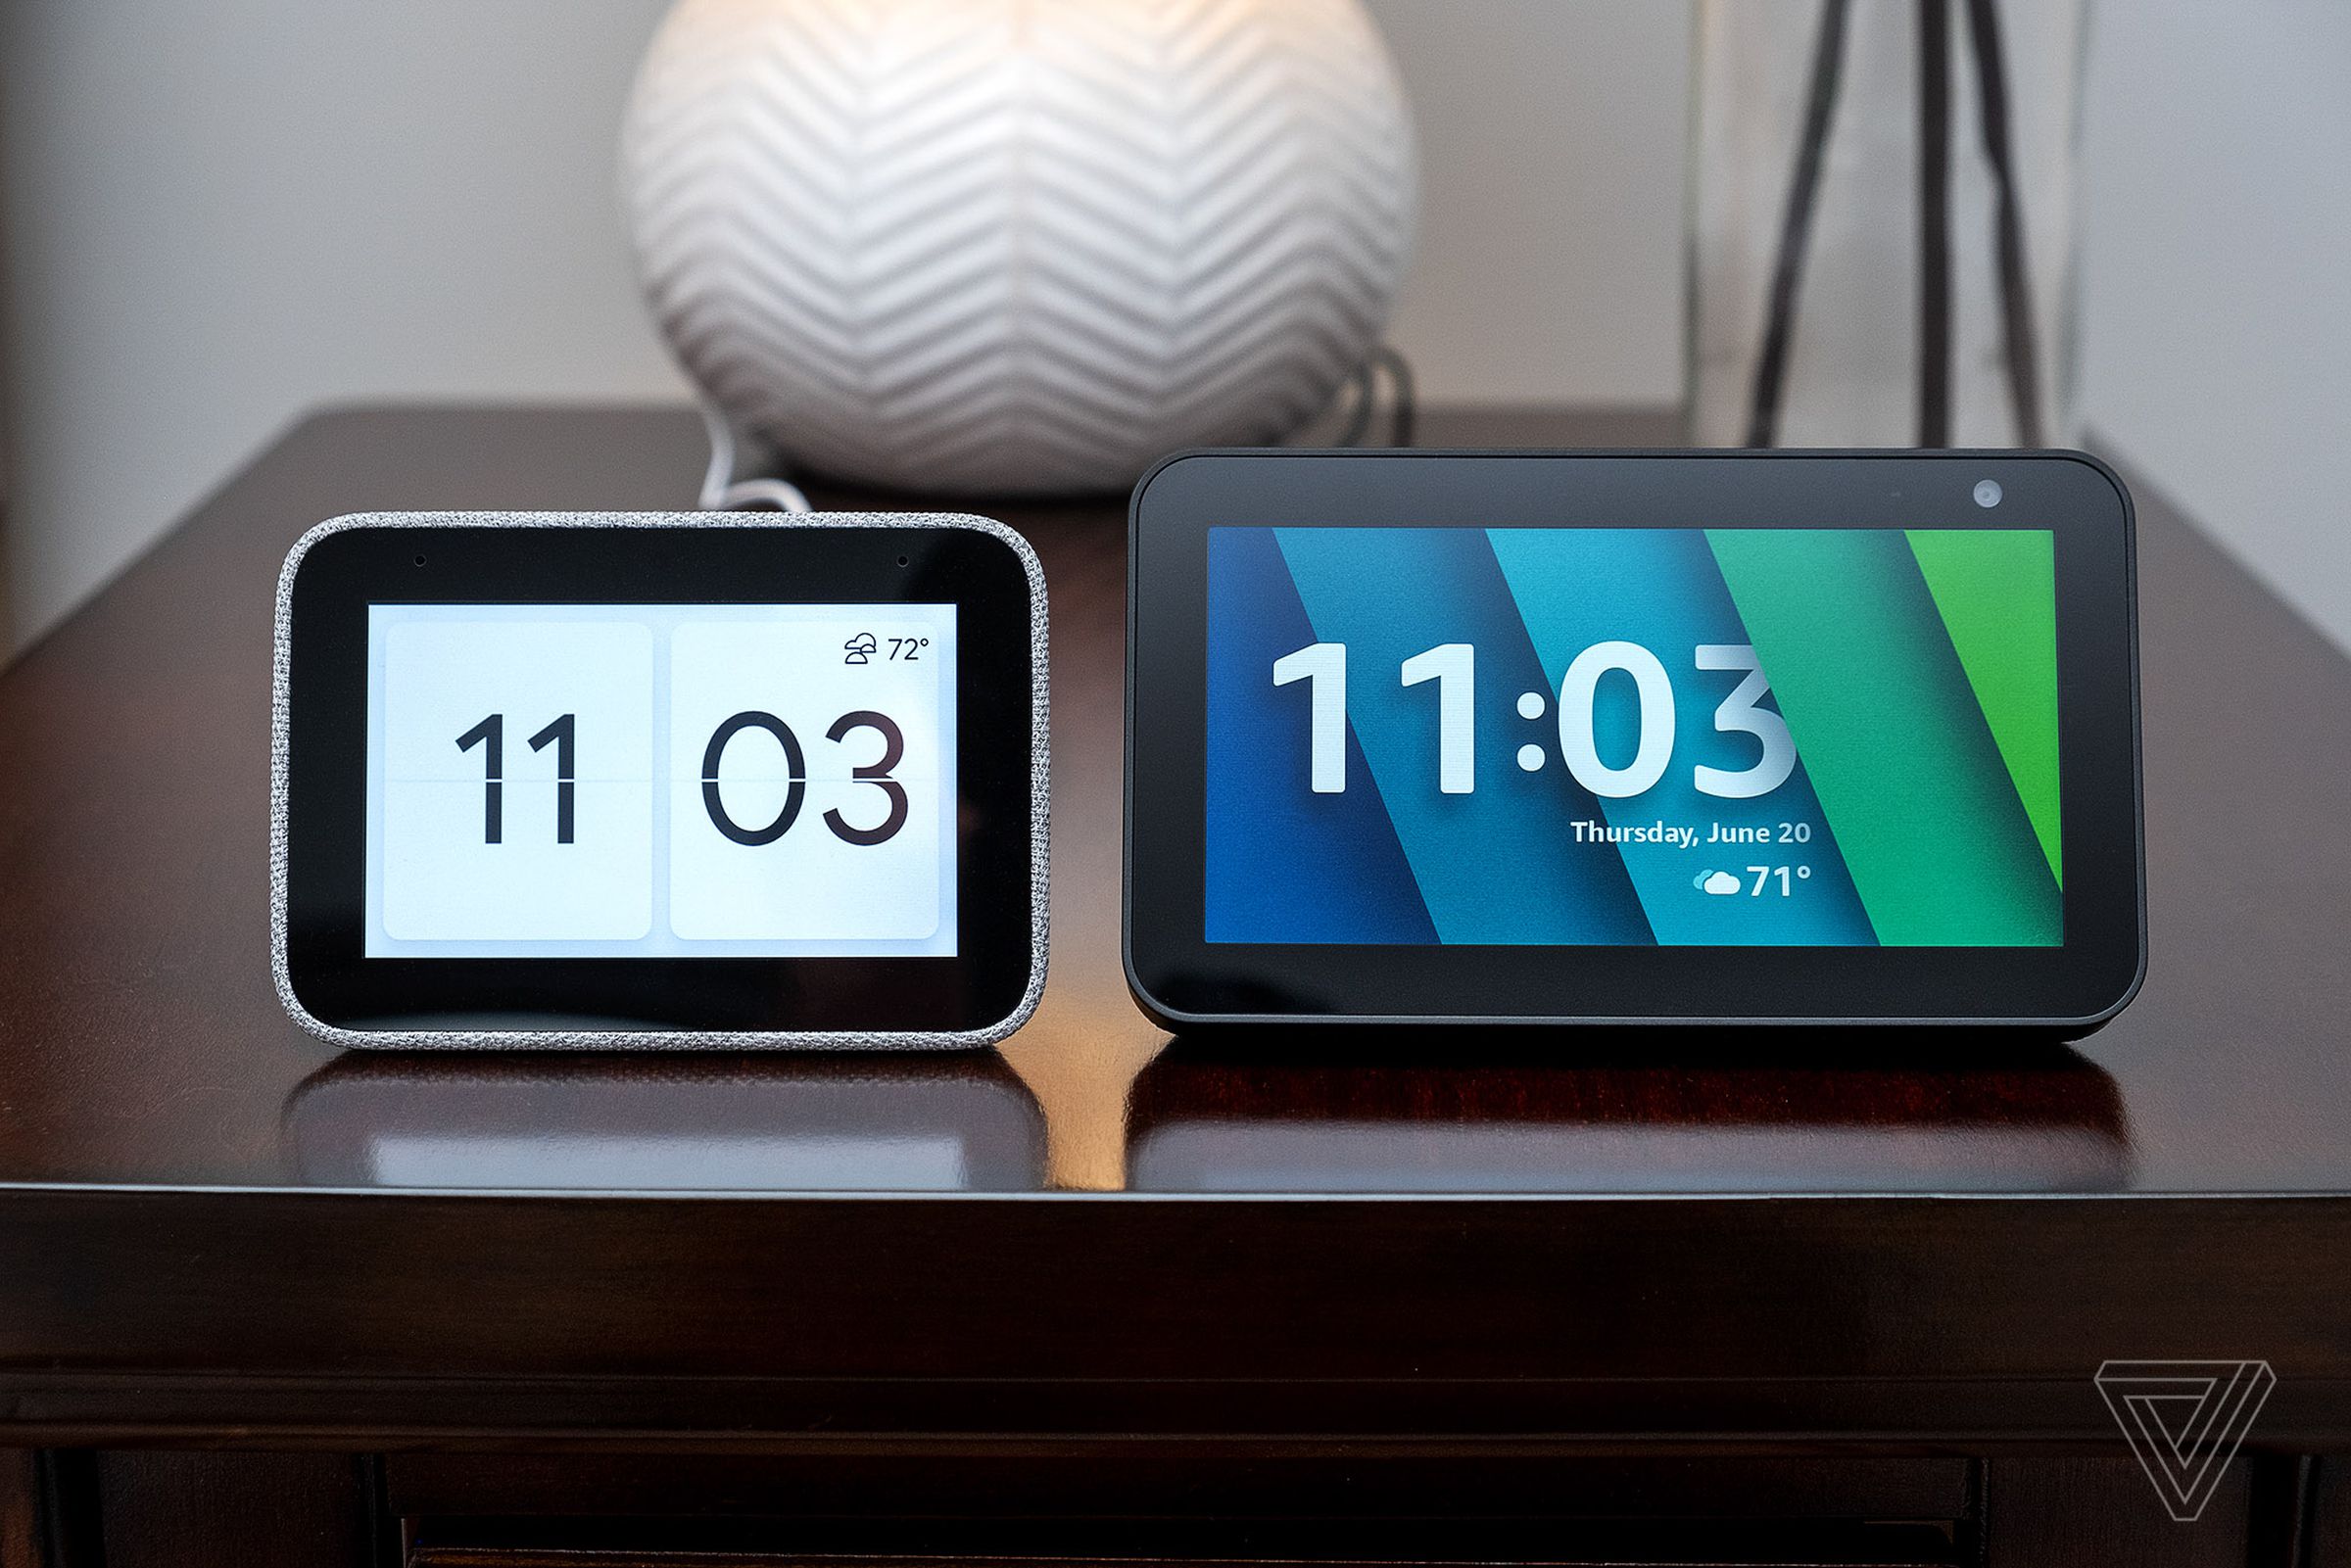 The Echo Show 5 (right) has a larger and more useful display than the Lenovo Smart Clock (left).